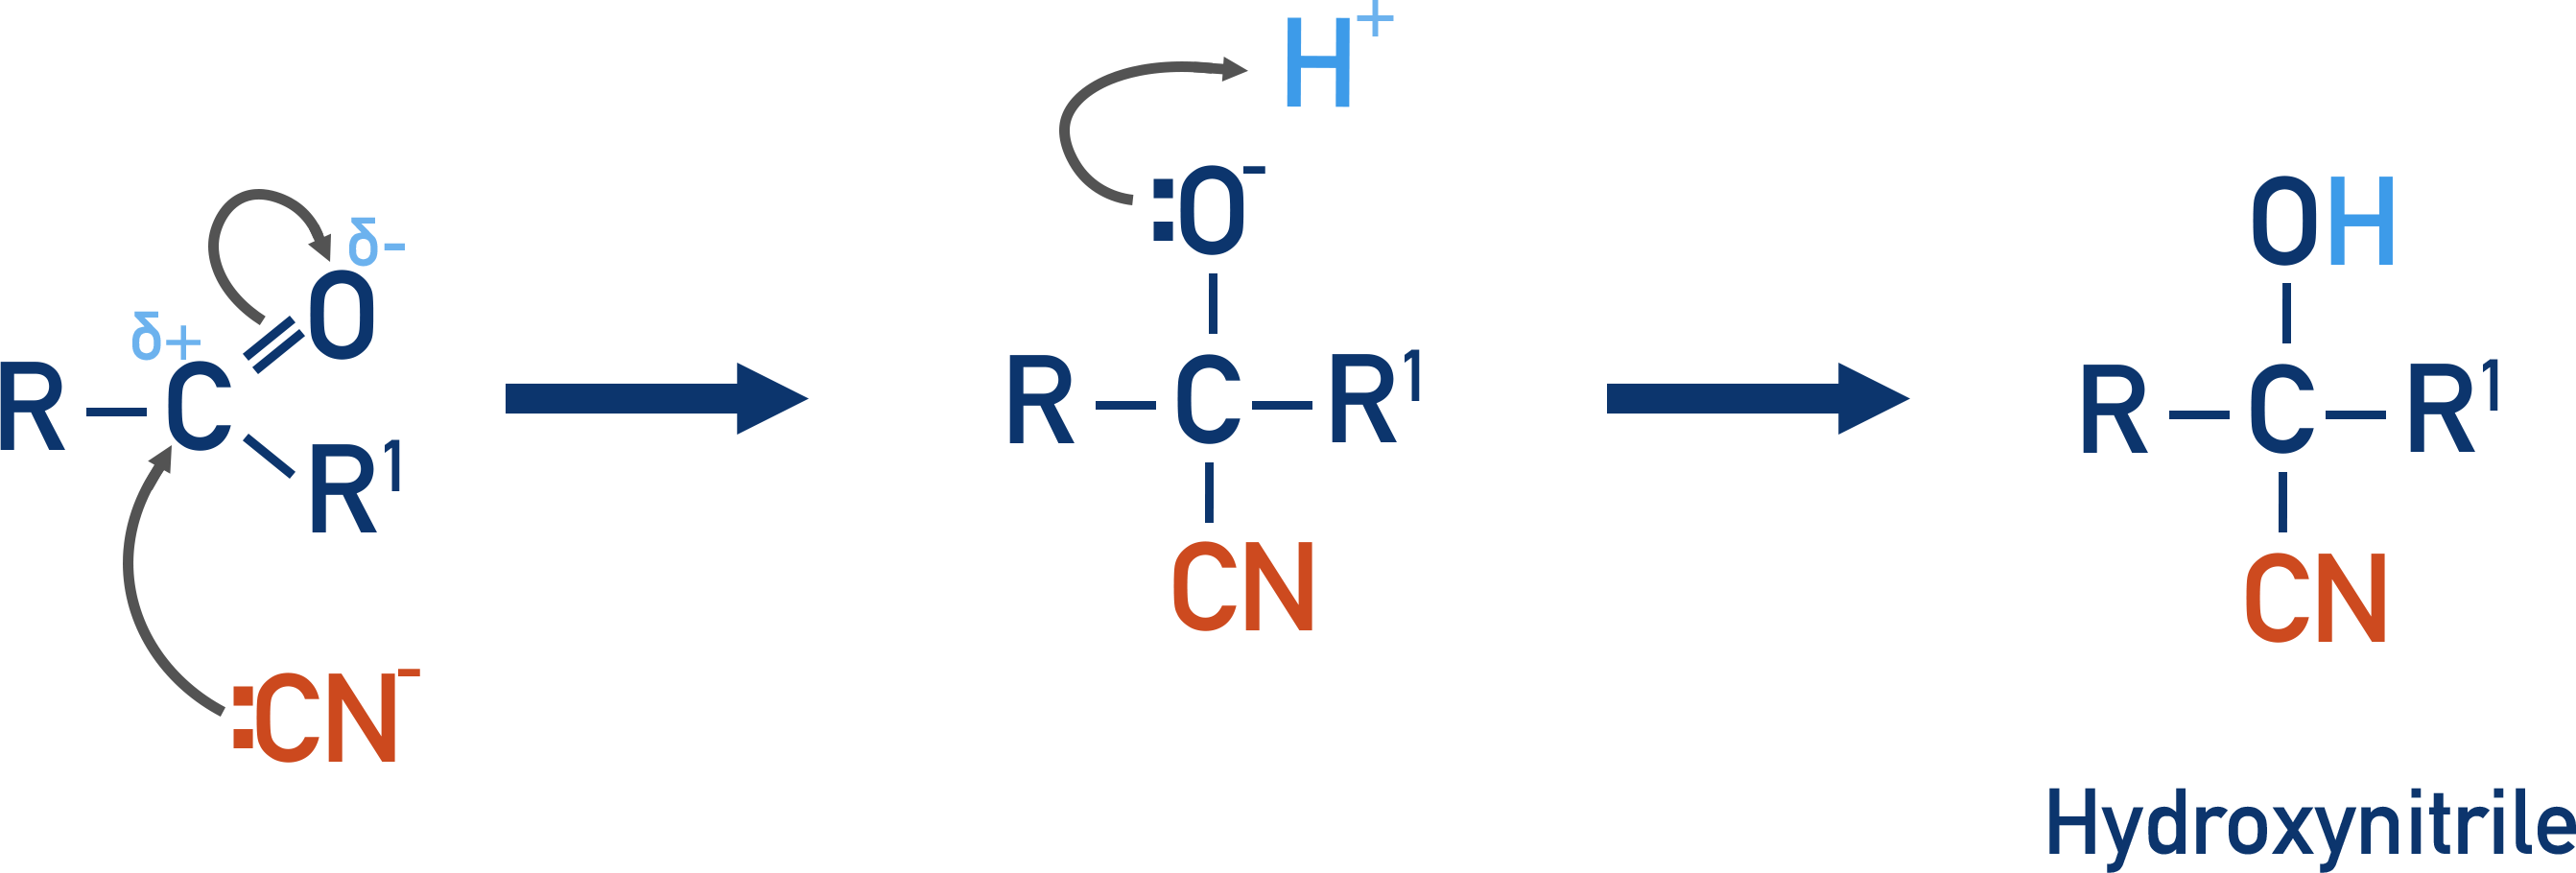 nucleophilic addition of HCN to carbonyl mechanism to form hydroxynitrile